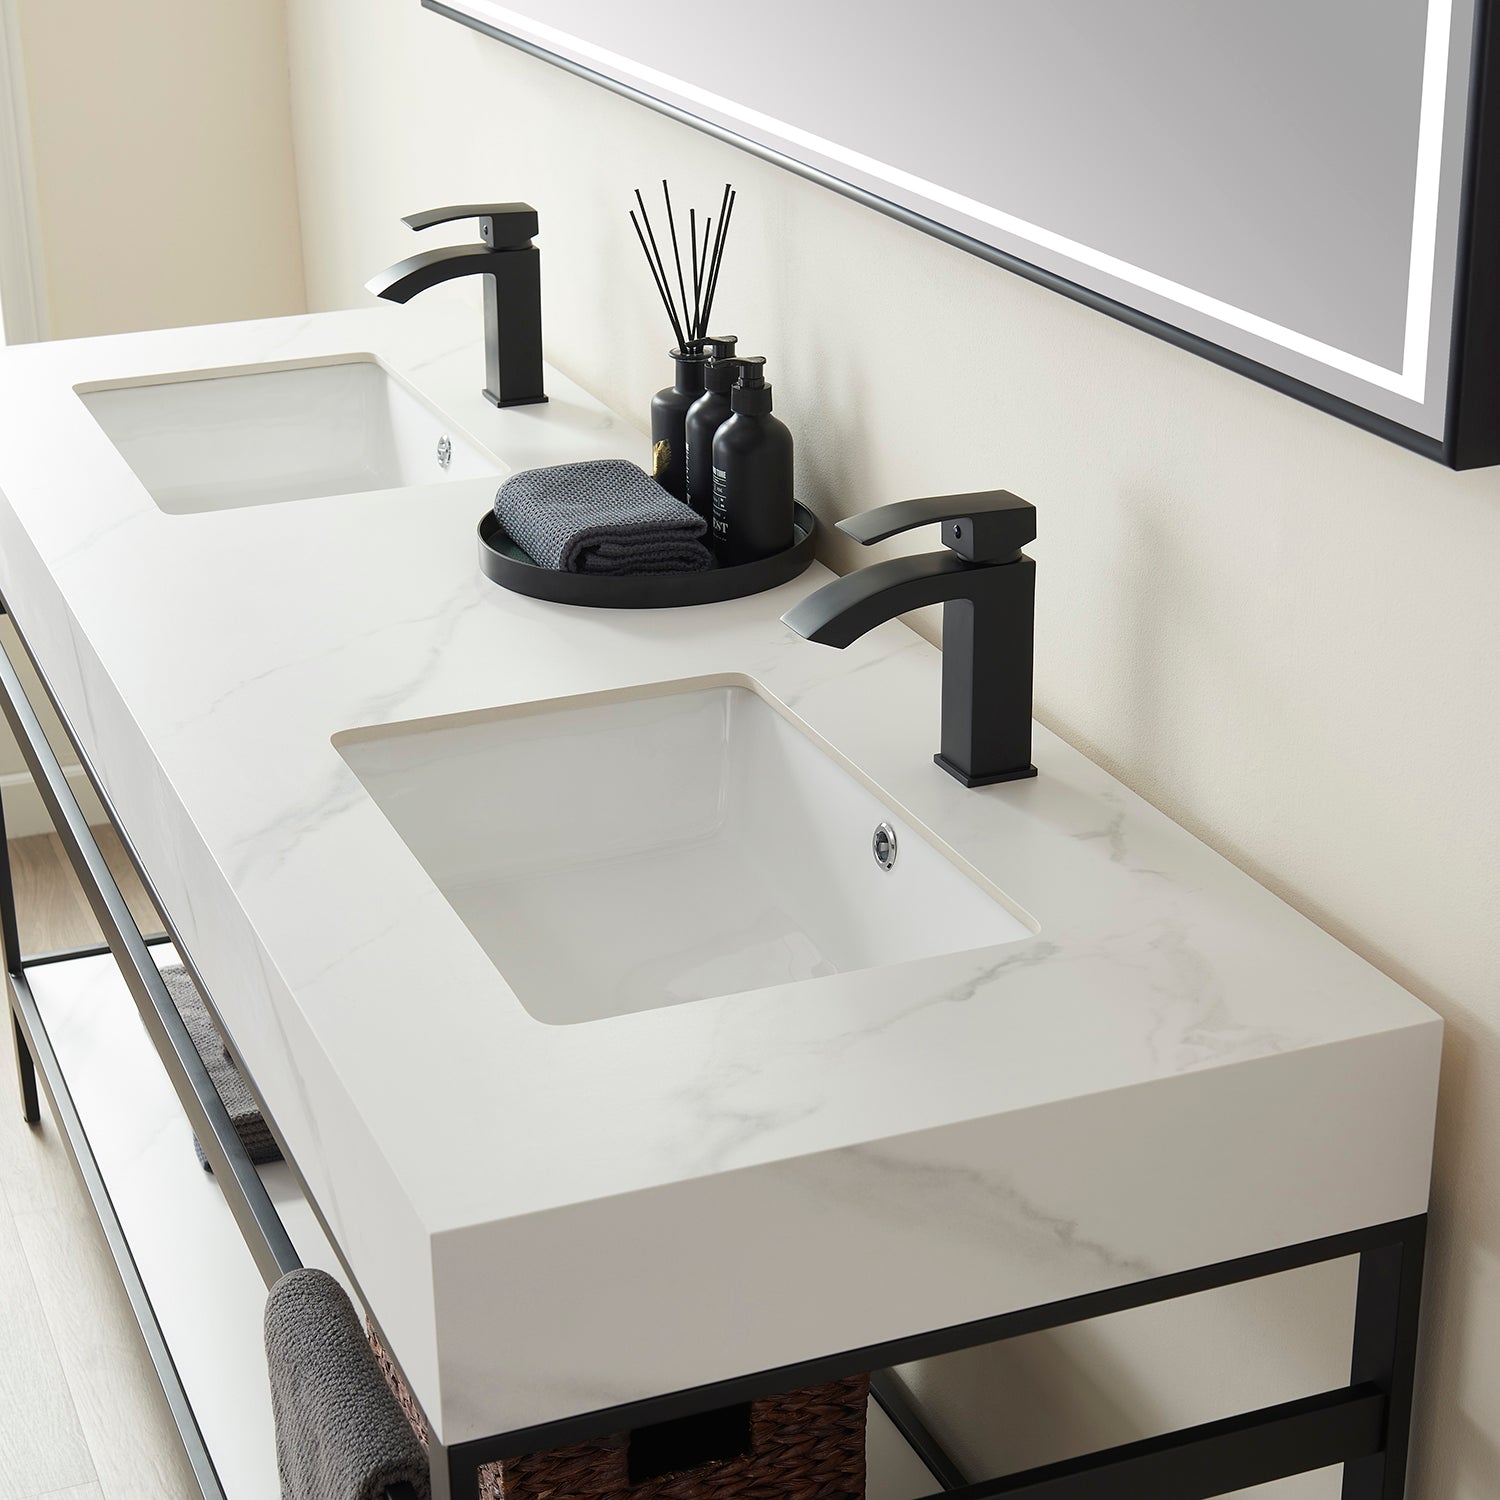 Funes 72" Double Sink Bath Vanity in Matte Black Metal Support with White Sintered Stone Top